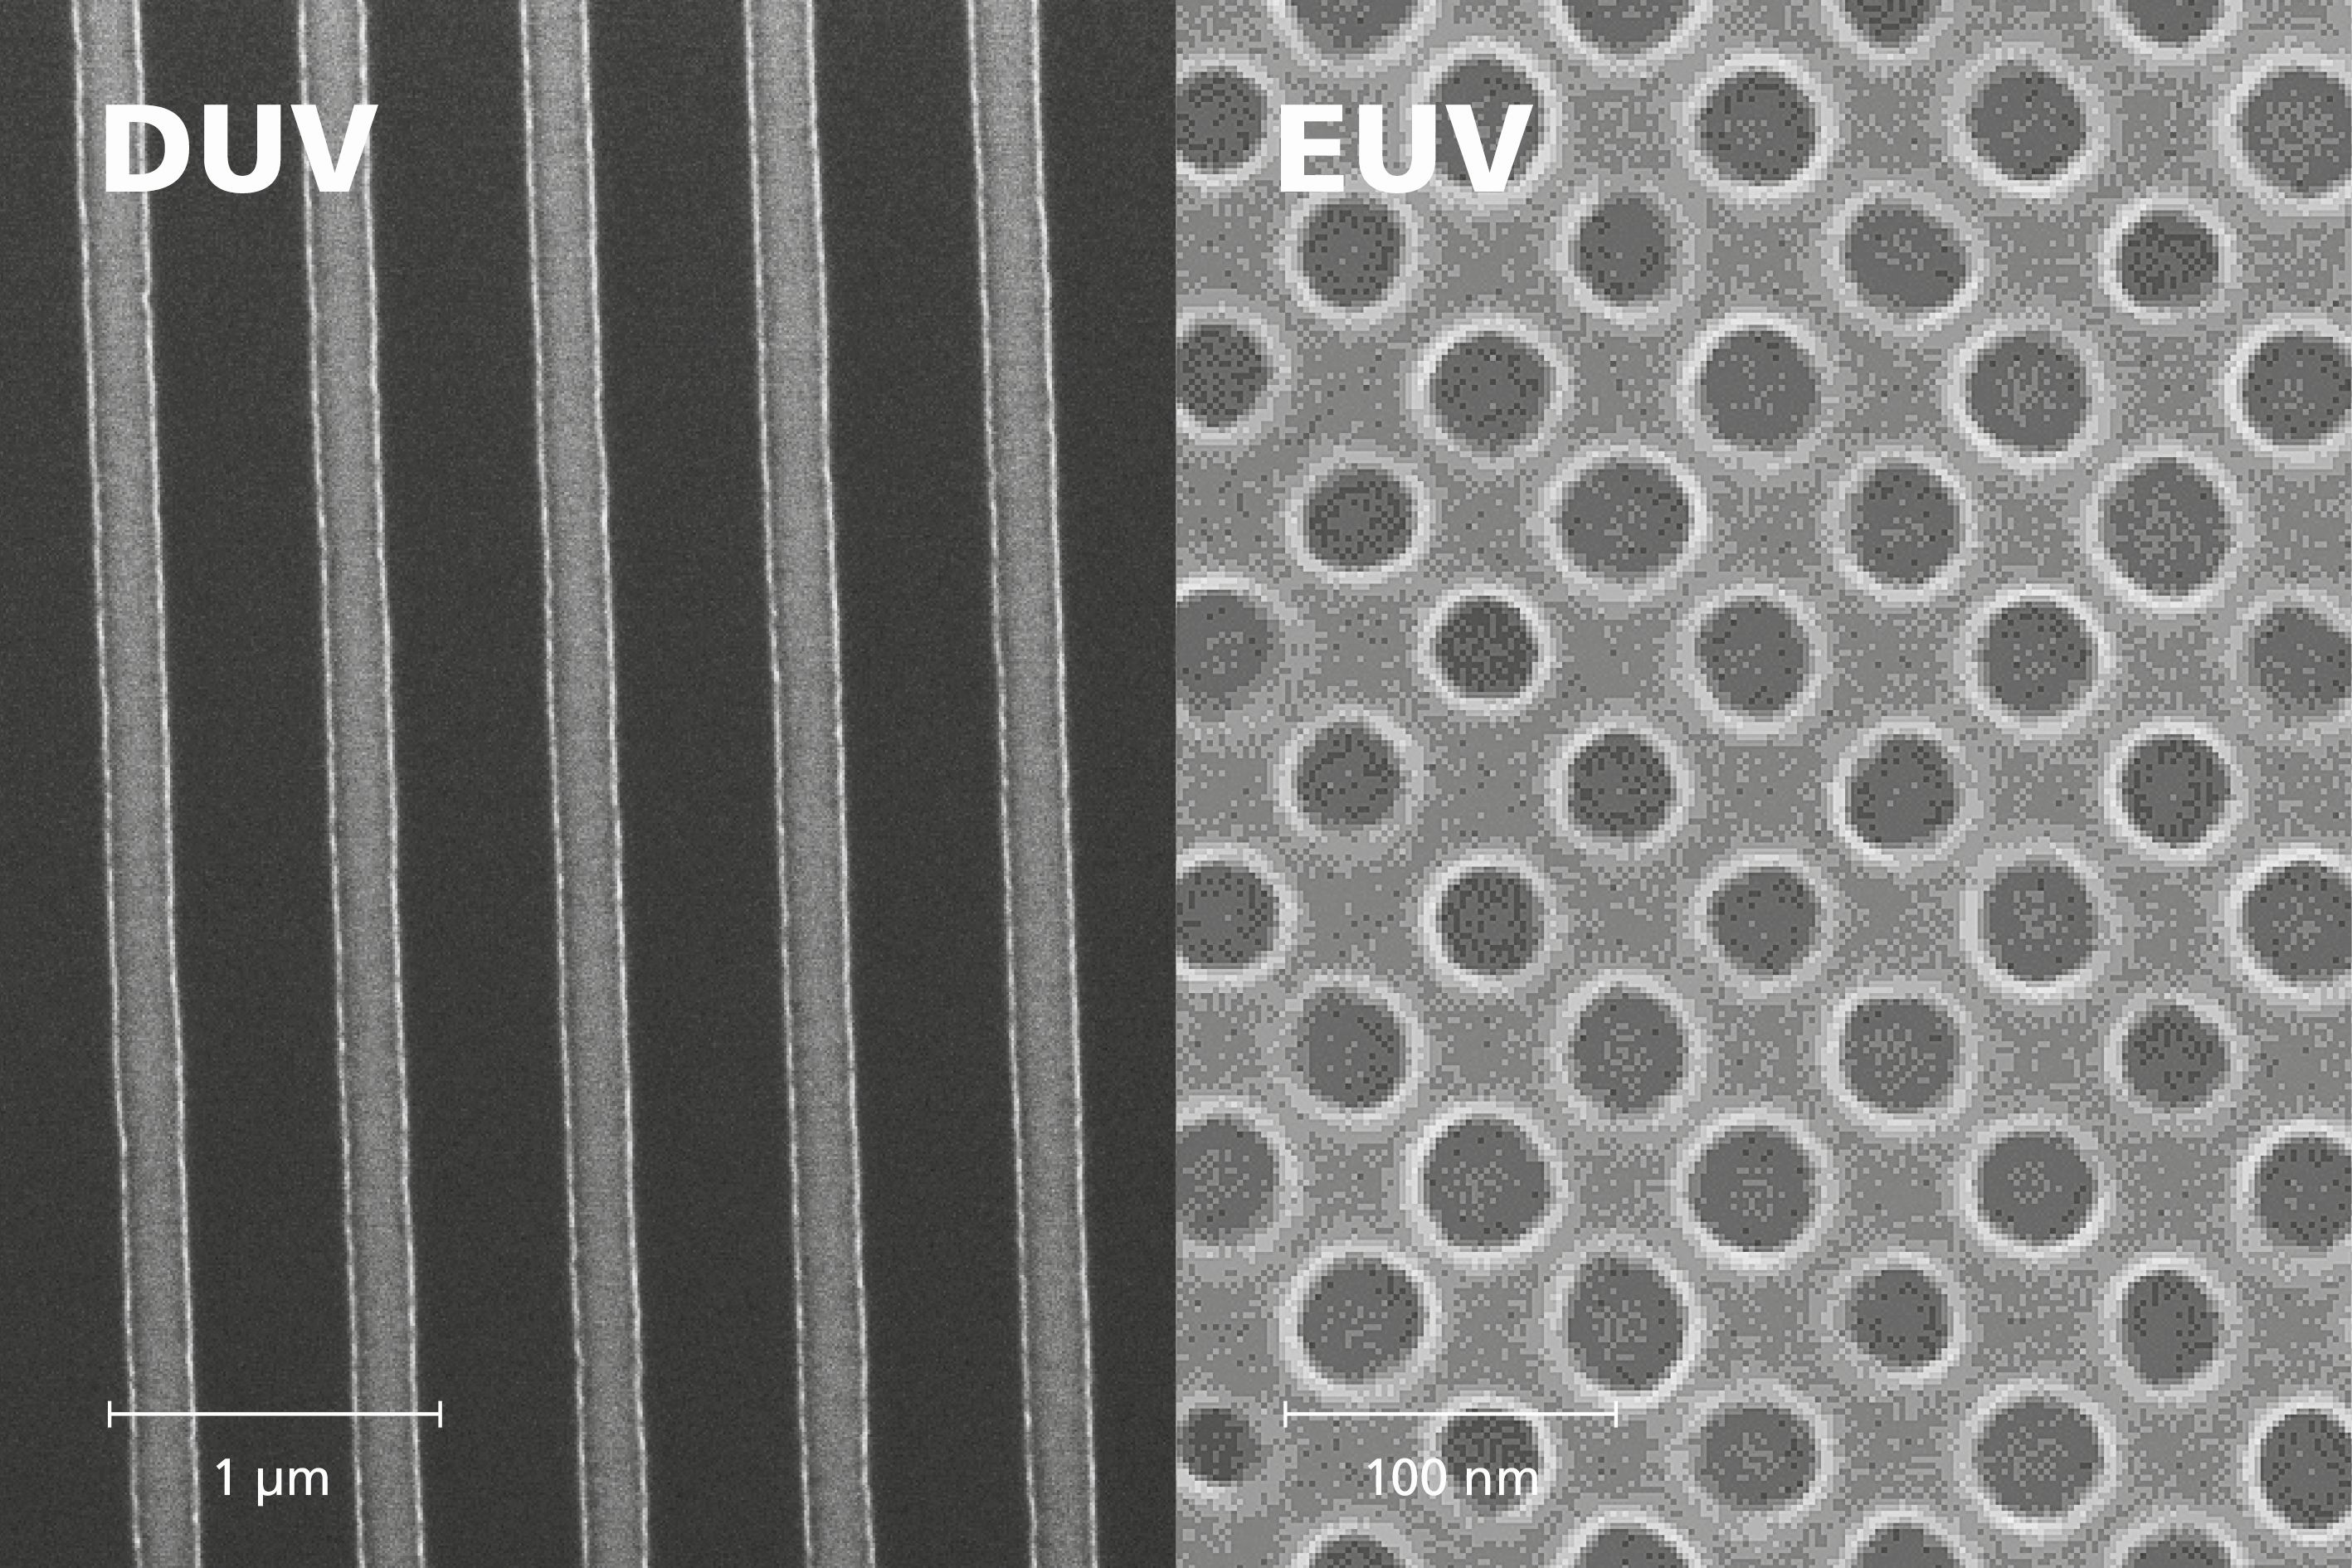 The nanostructures with 300 nm (left, DUV) and 28 nm (right, EUV) half-pitch (HP) – the world’s smallest structures, generated with laboratory-based EUV source.